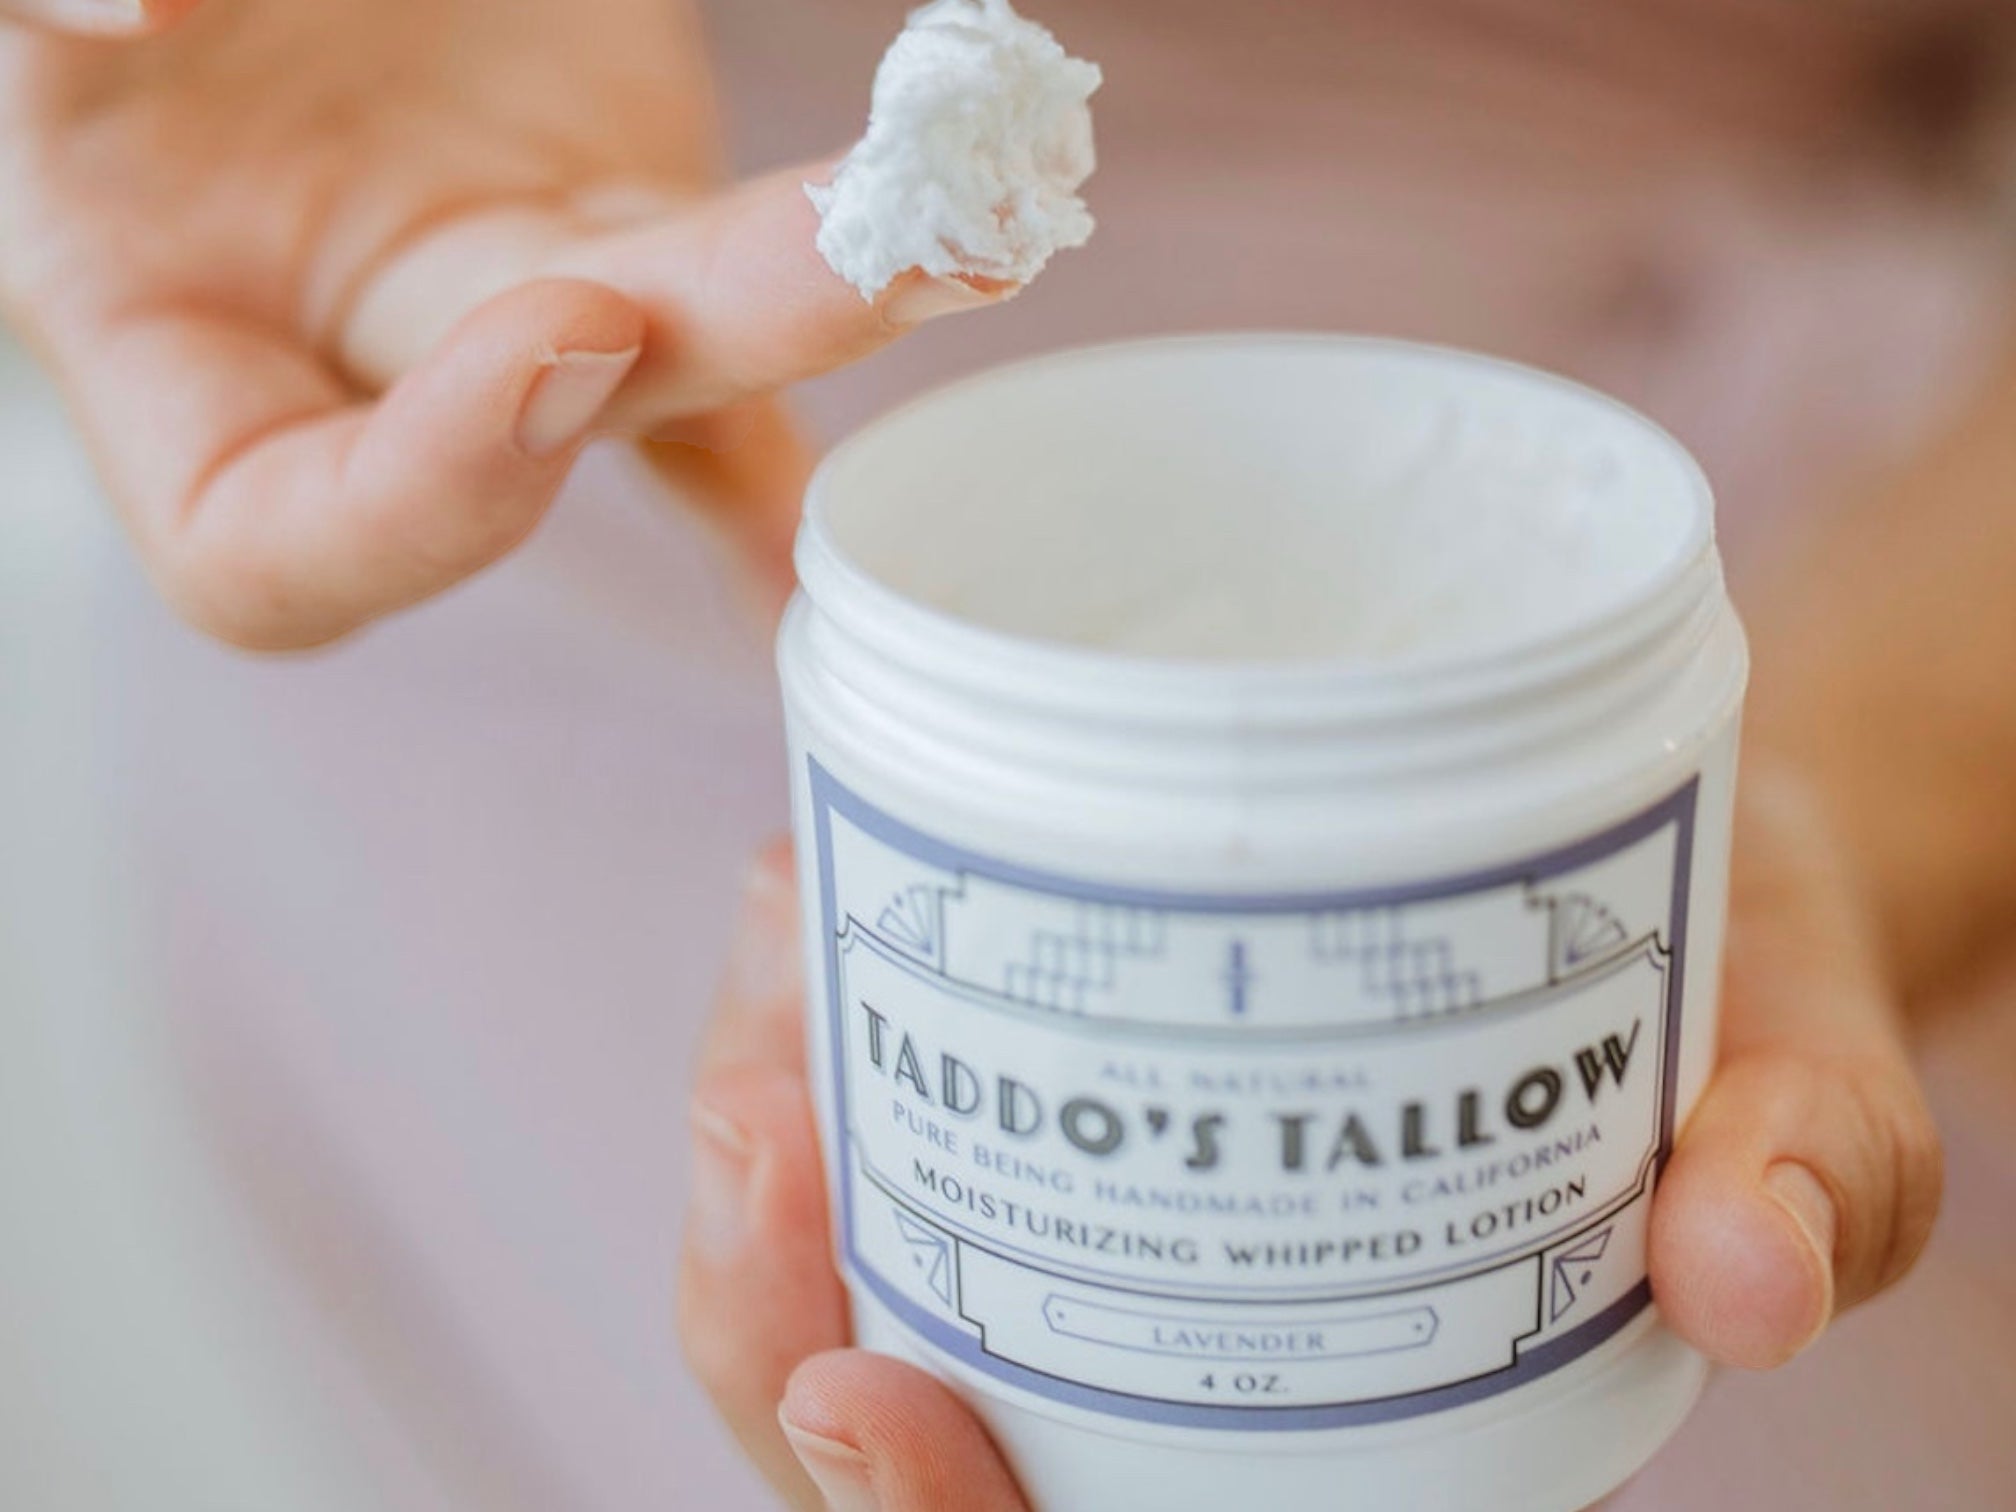 Whipped tallow on finger